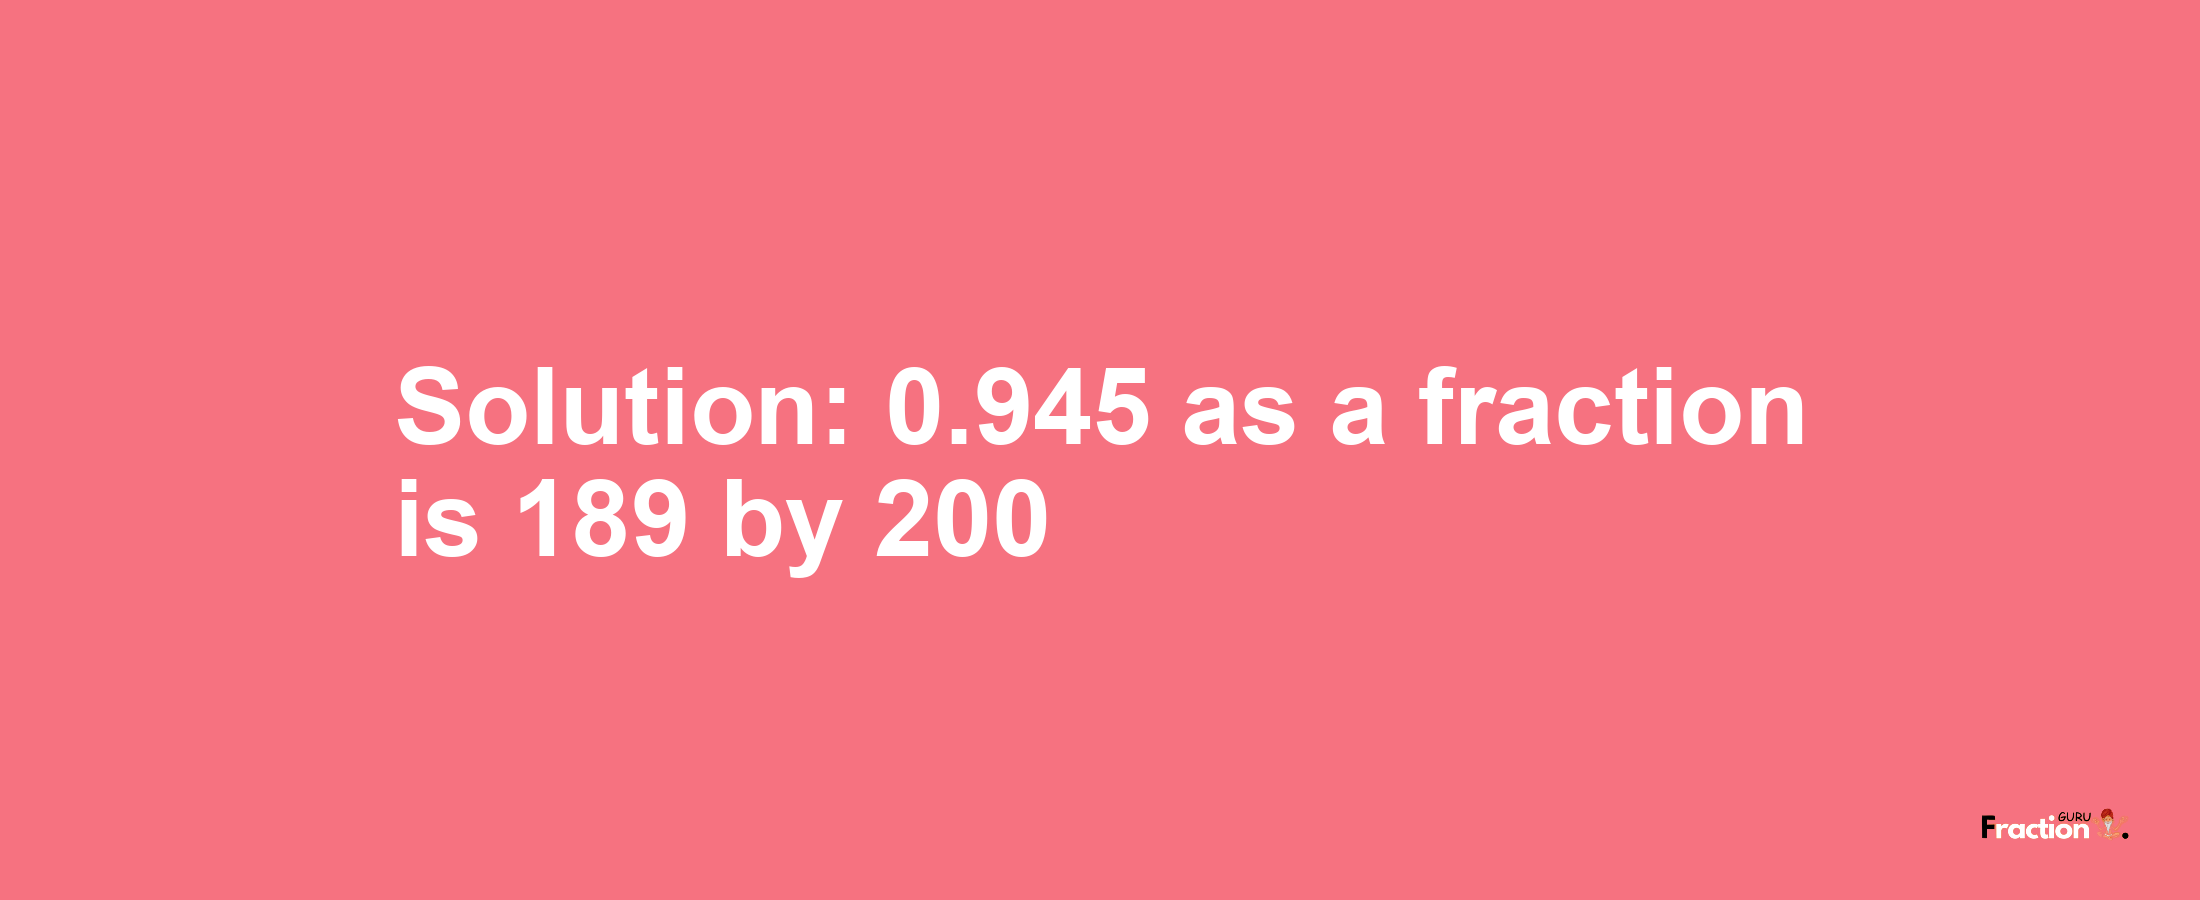 Solution:0.945 as a fraction is 189/200